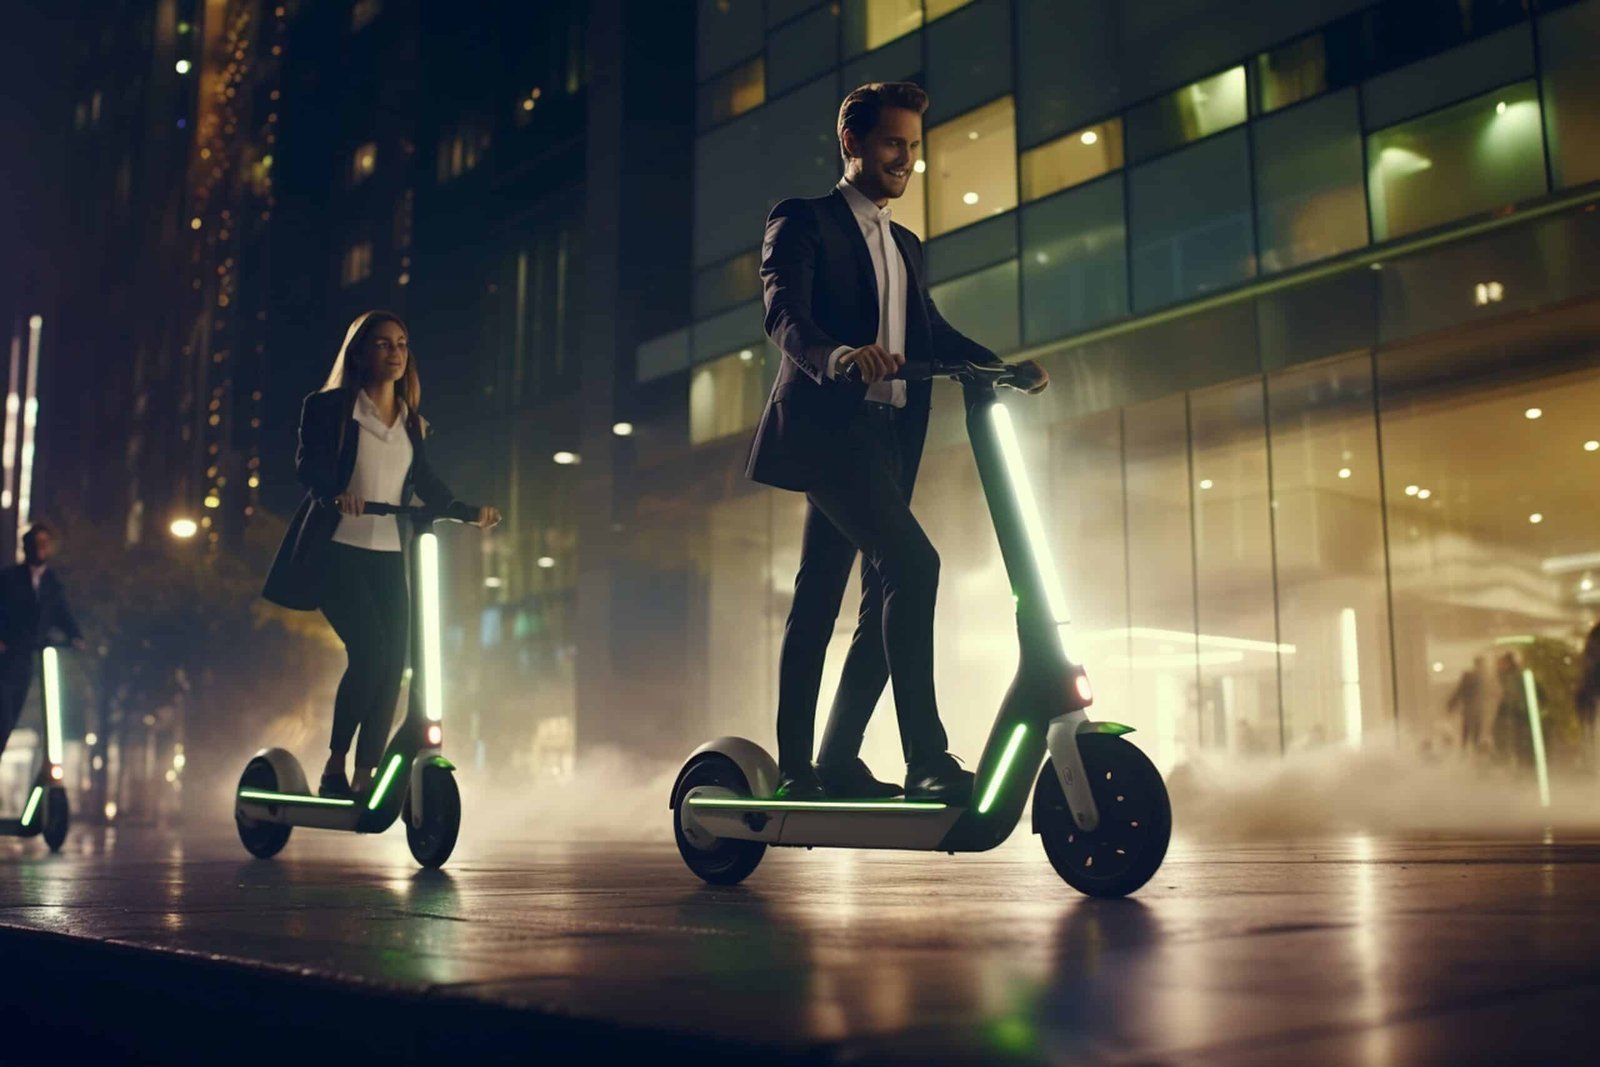 Explore The Future Of Personal Transport With Segway’s Innovative Electric Vehicles